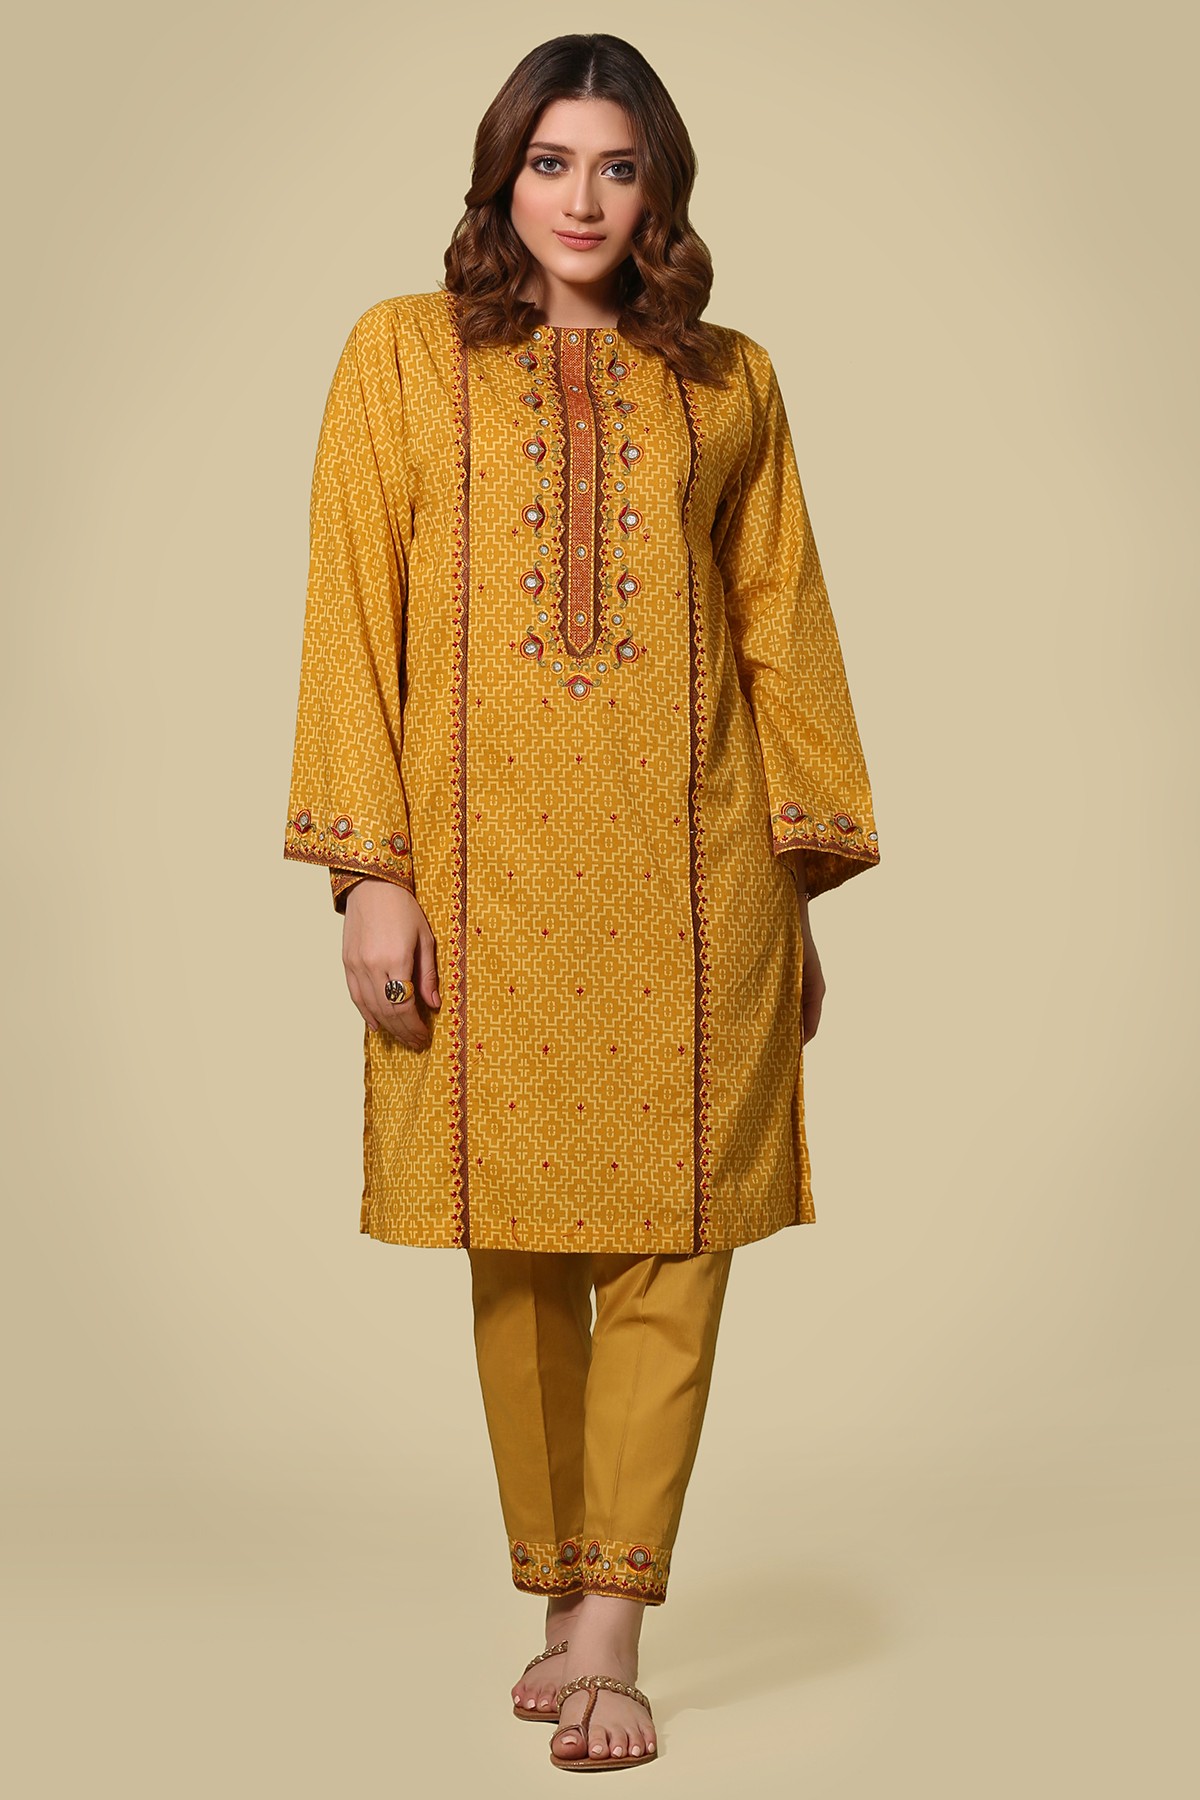 Kayseria Collection 19 Printed Embroidered Shirt C 3143 - Lawncollection.pk